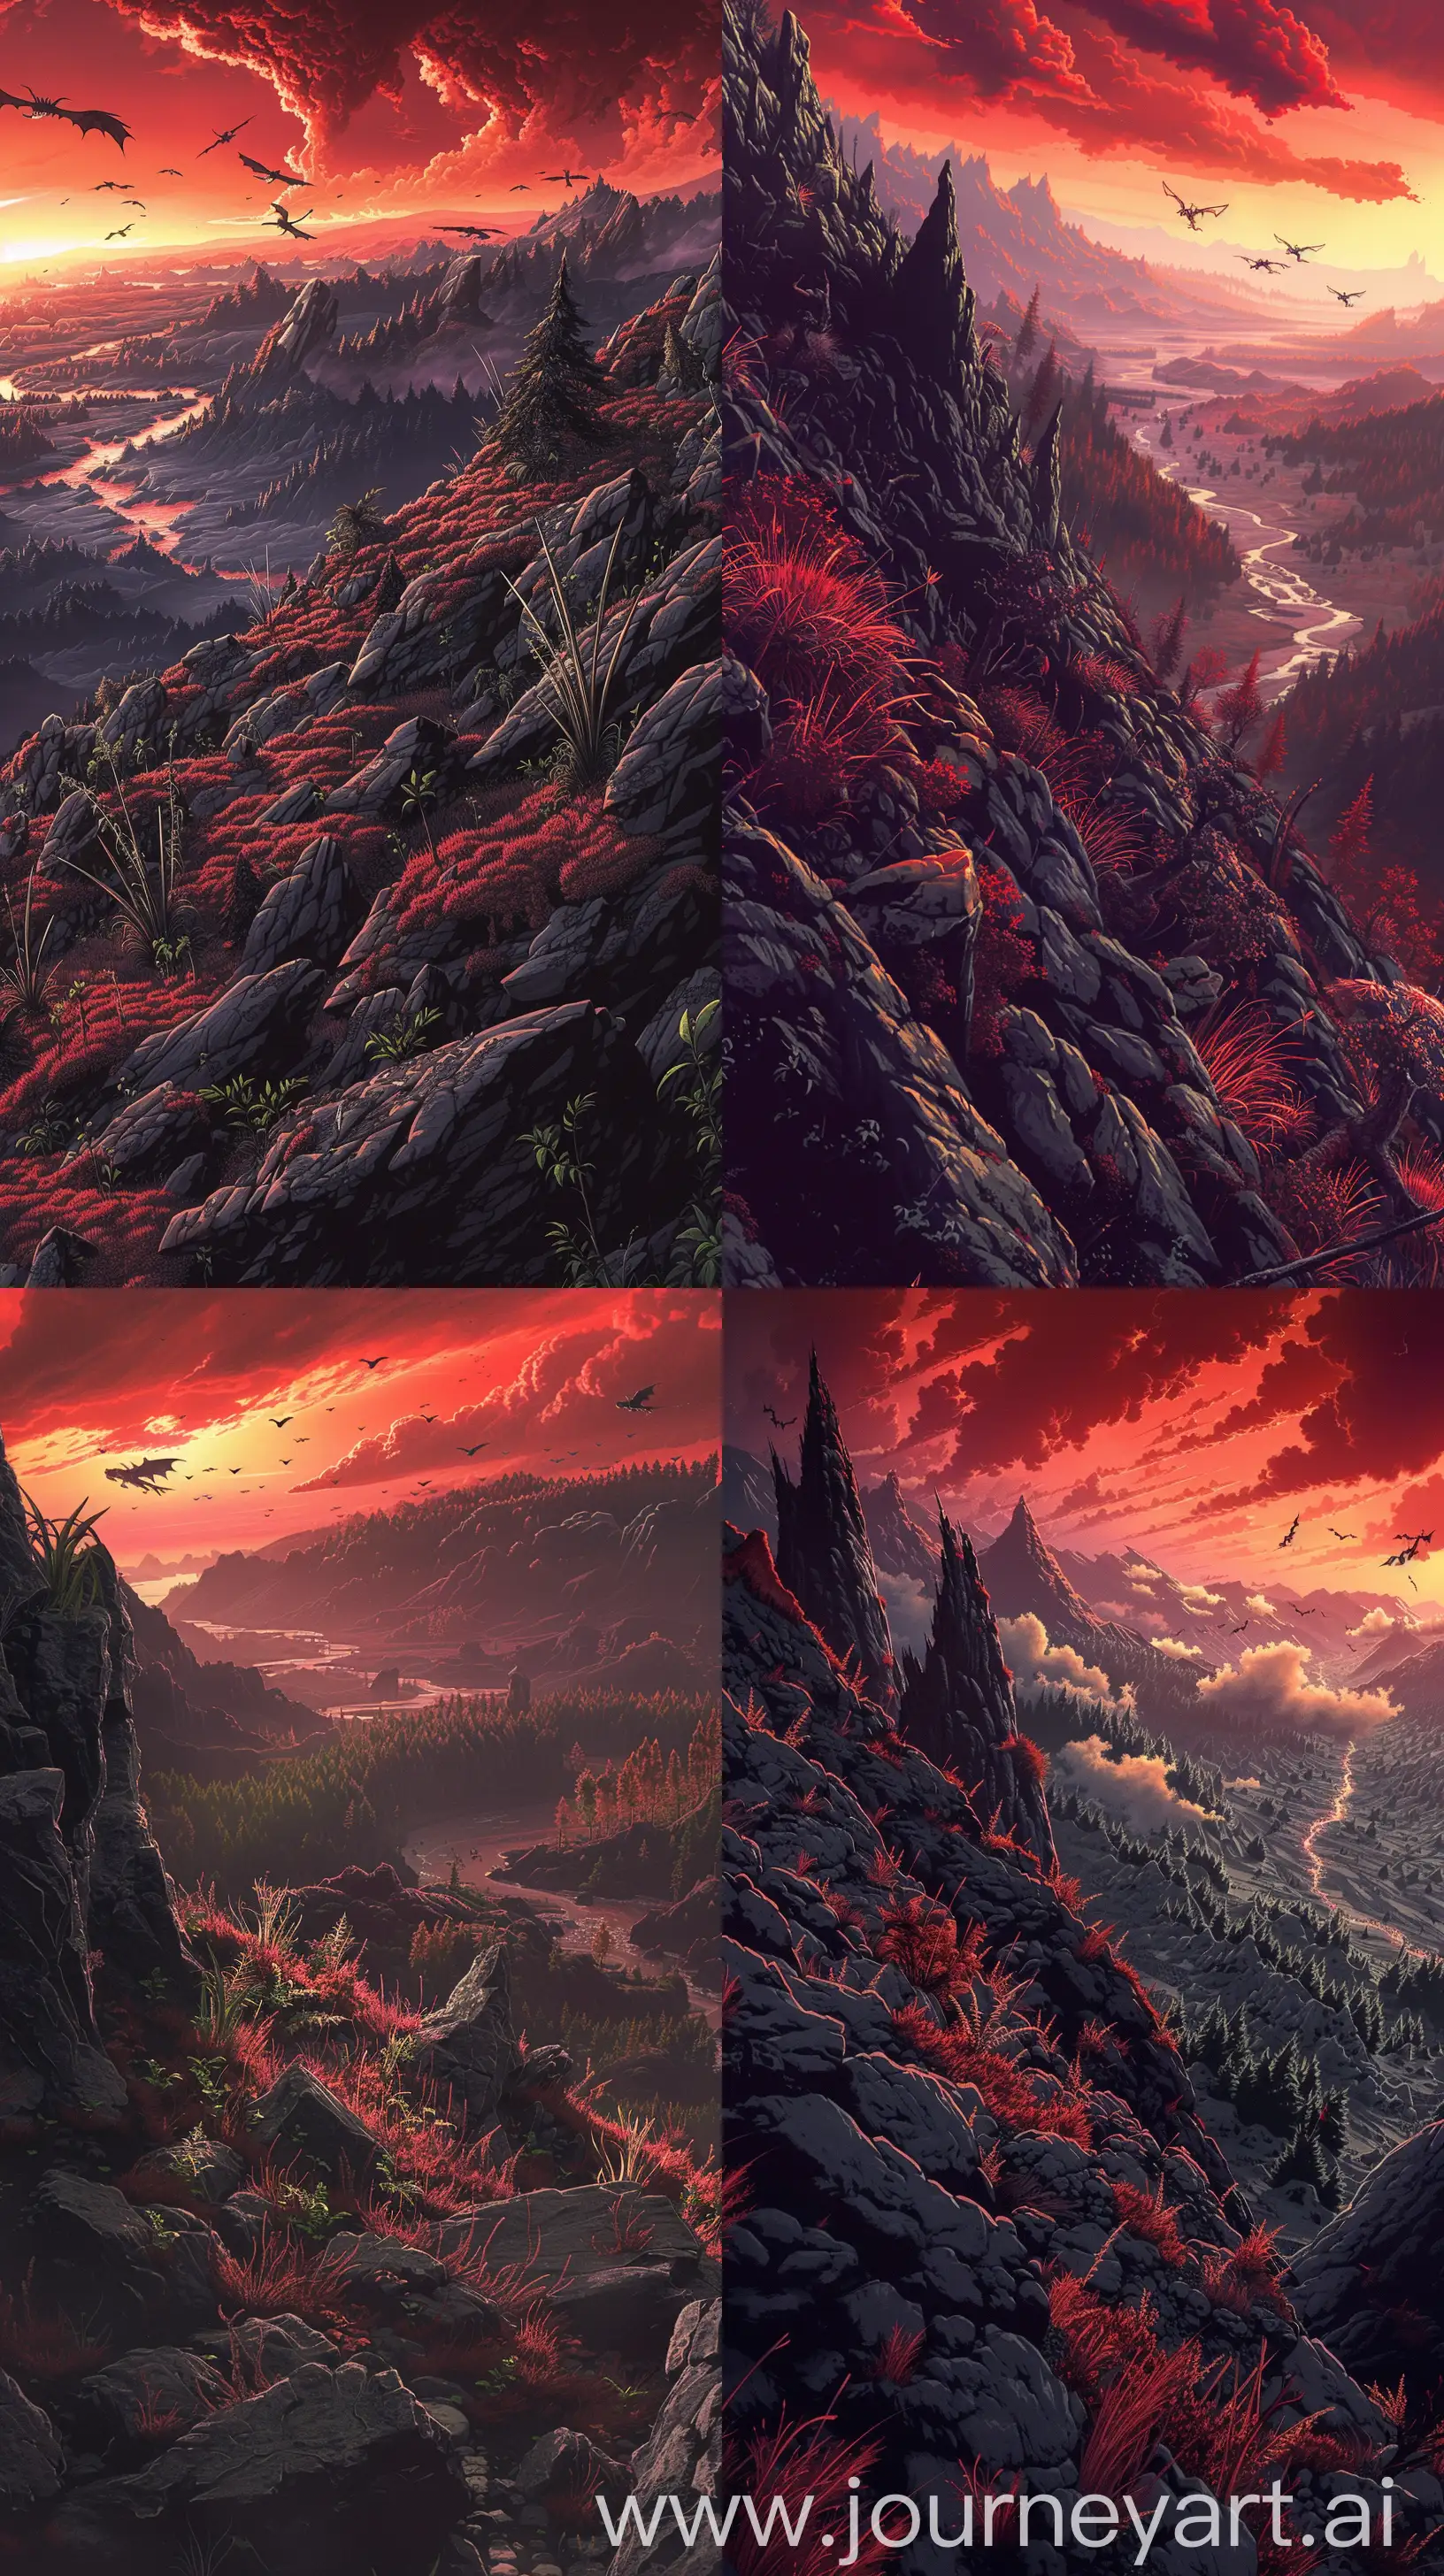 ((Illustration)), ((niji)), ((anime style with influences from studio ghibli)), ((ultra high resolution, fine details, textured, blu-ray, raw)), a epic landscape, epic, dark fantasy, label, in a fantastic world, in the foreground surface of a rocky mountain of dark stones with plants and reddish grass. Escape point into the valley below with rivers, detailed mountains, the field is rocky with rocks so solid that they shine. The sky is red with dense dark clouds, with mythical creatures like dragons flying in the distance. In the background features distant trees, and thin clouds in the distance. View perspective from above to the deep point below, atmosphere of conflict, tension, --ar 9:16